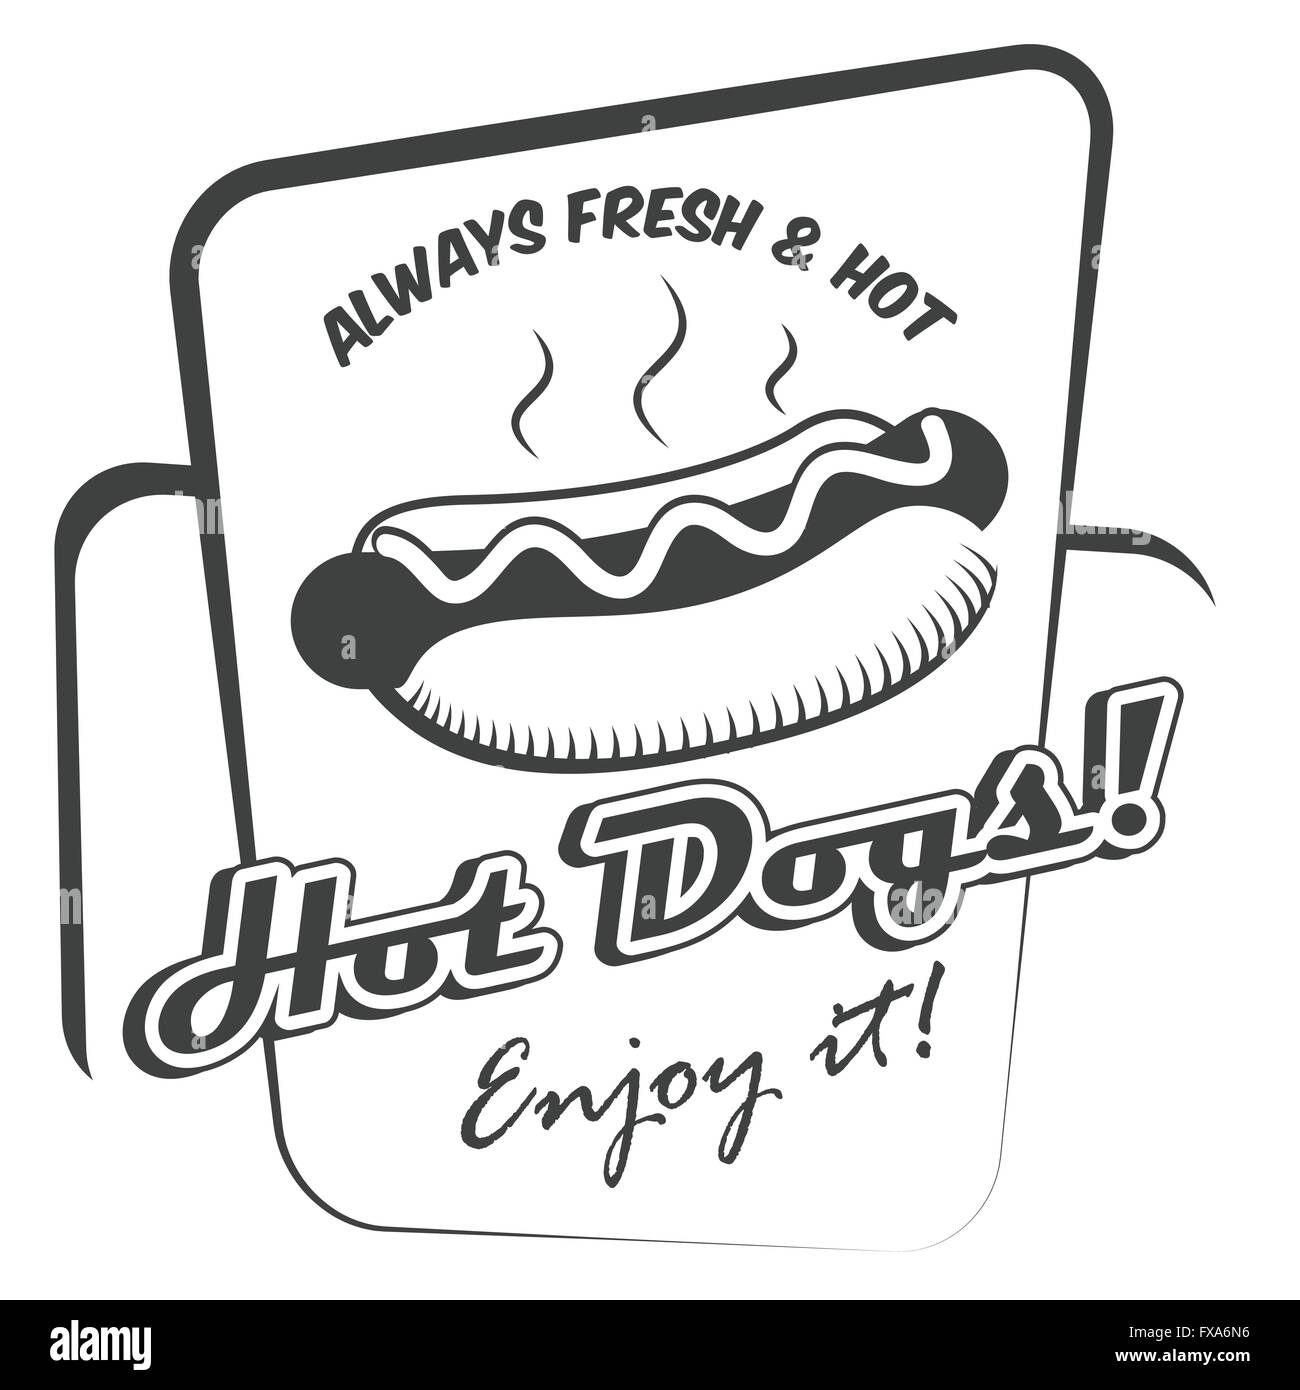 Hot dog poster Stock Vector